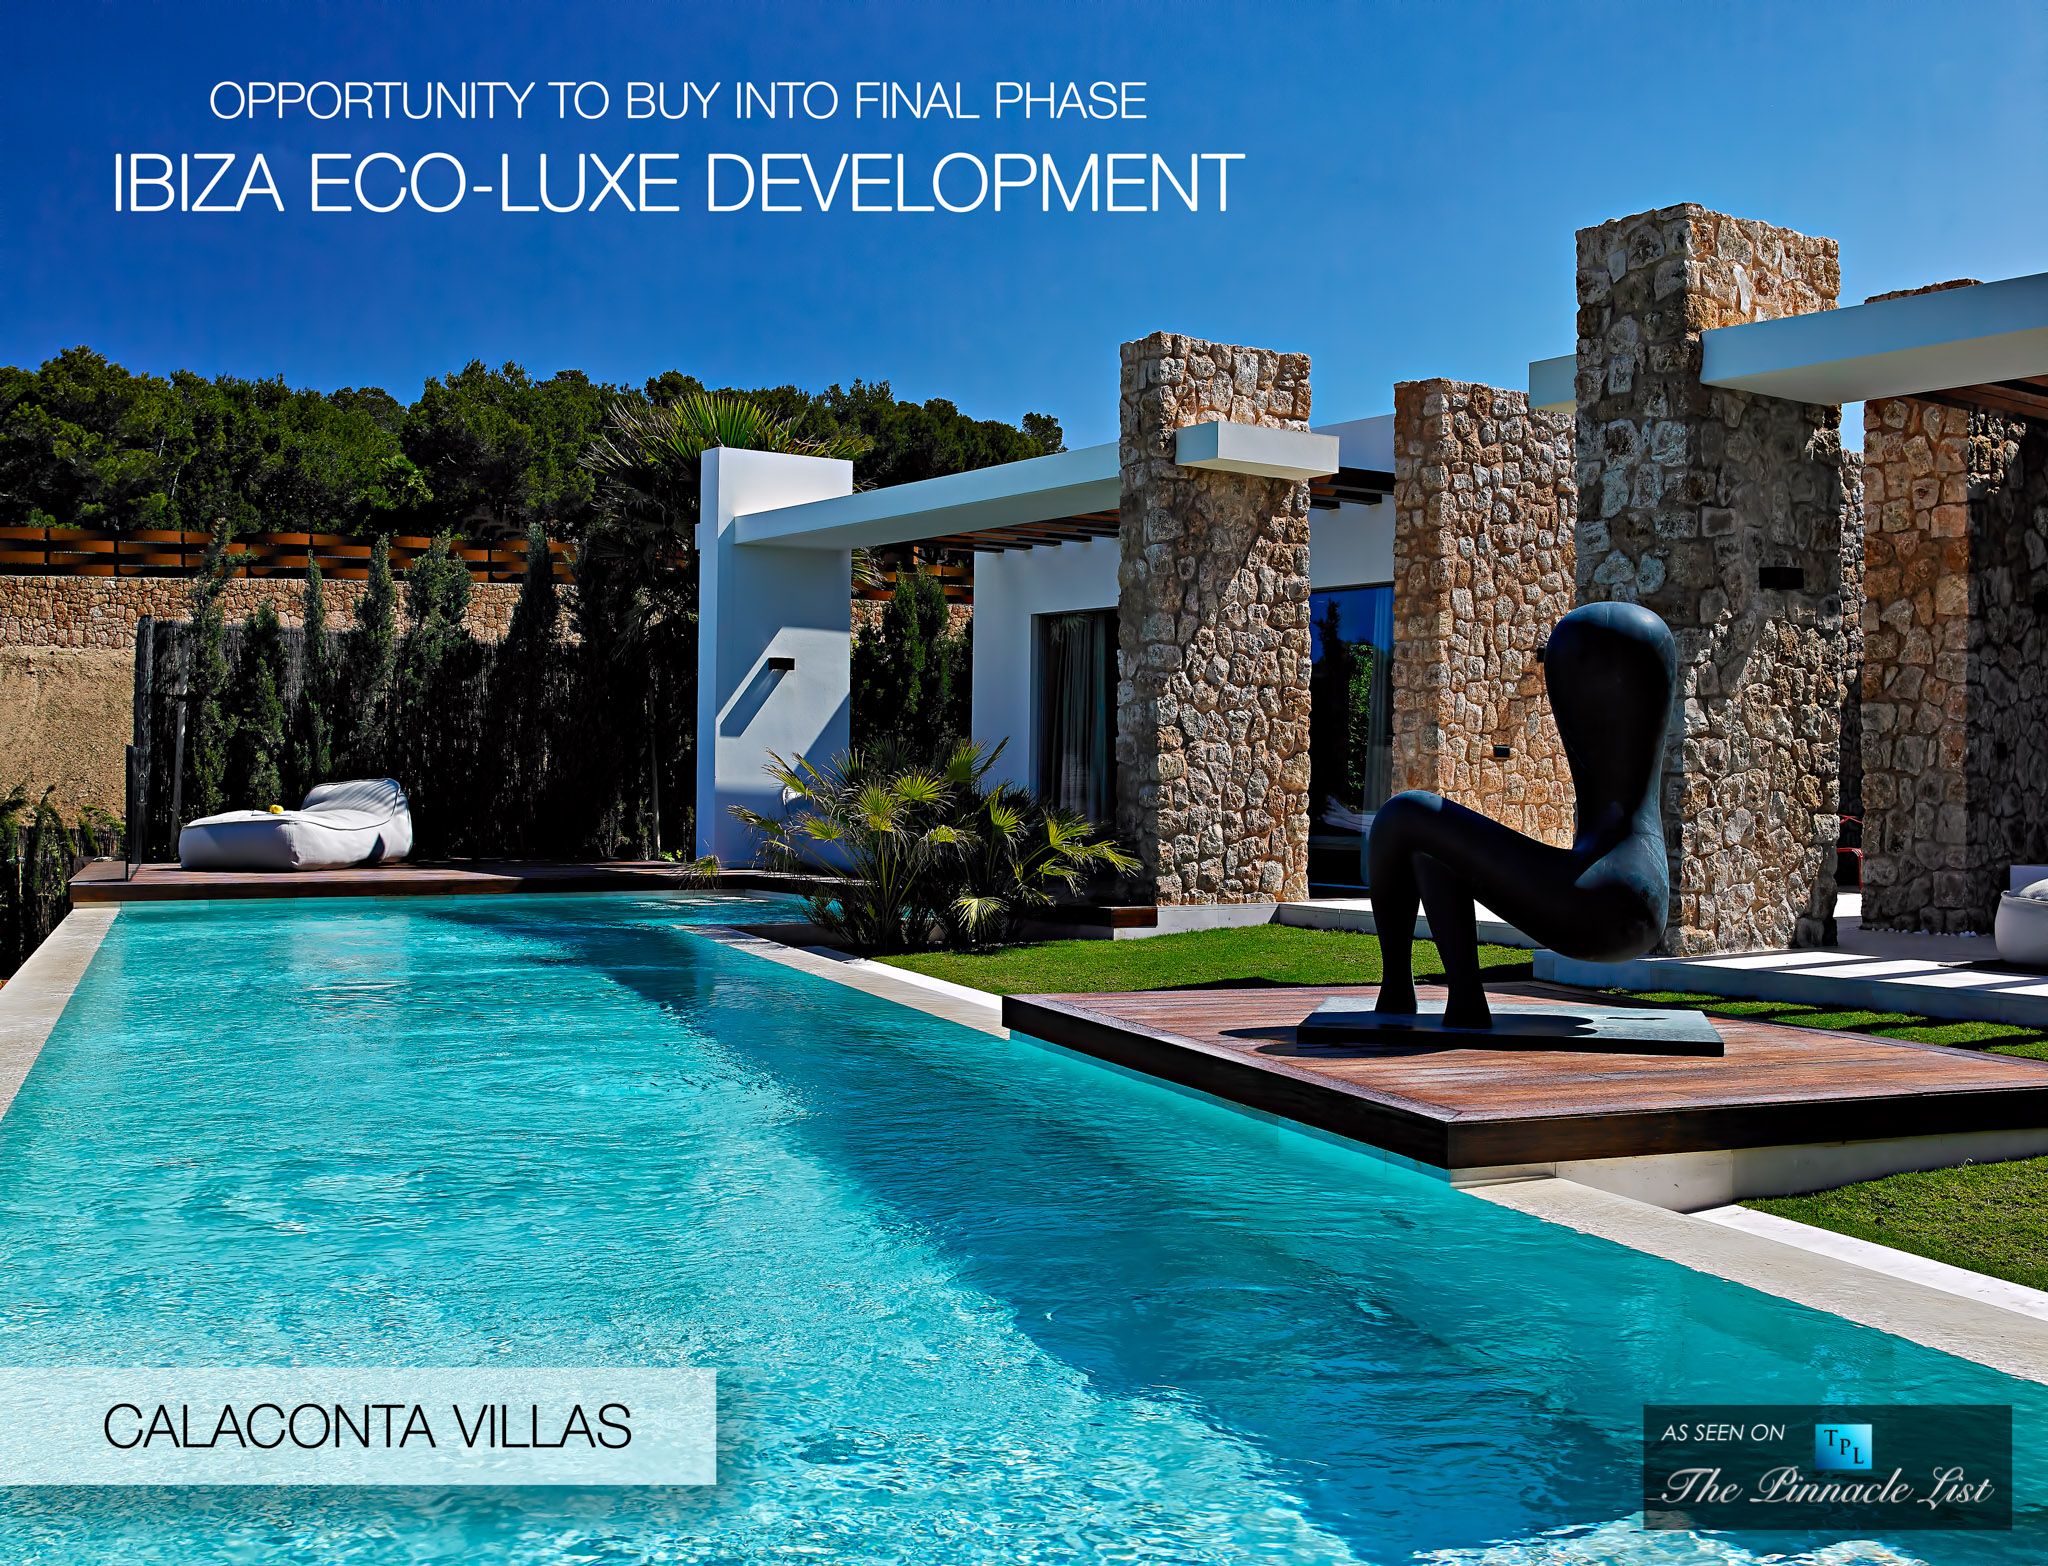 Calaconta Villas – Opportunity to Buy into Final Phase of Eco-Luxe Development in Ibiza